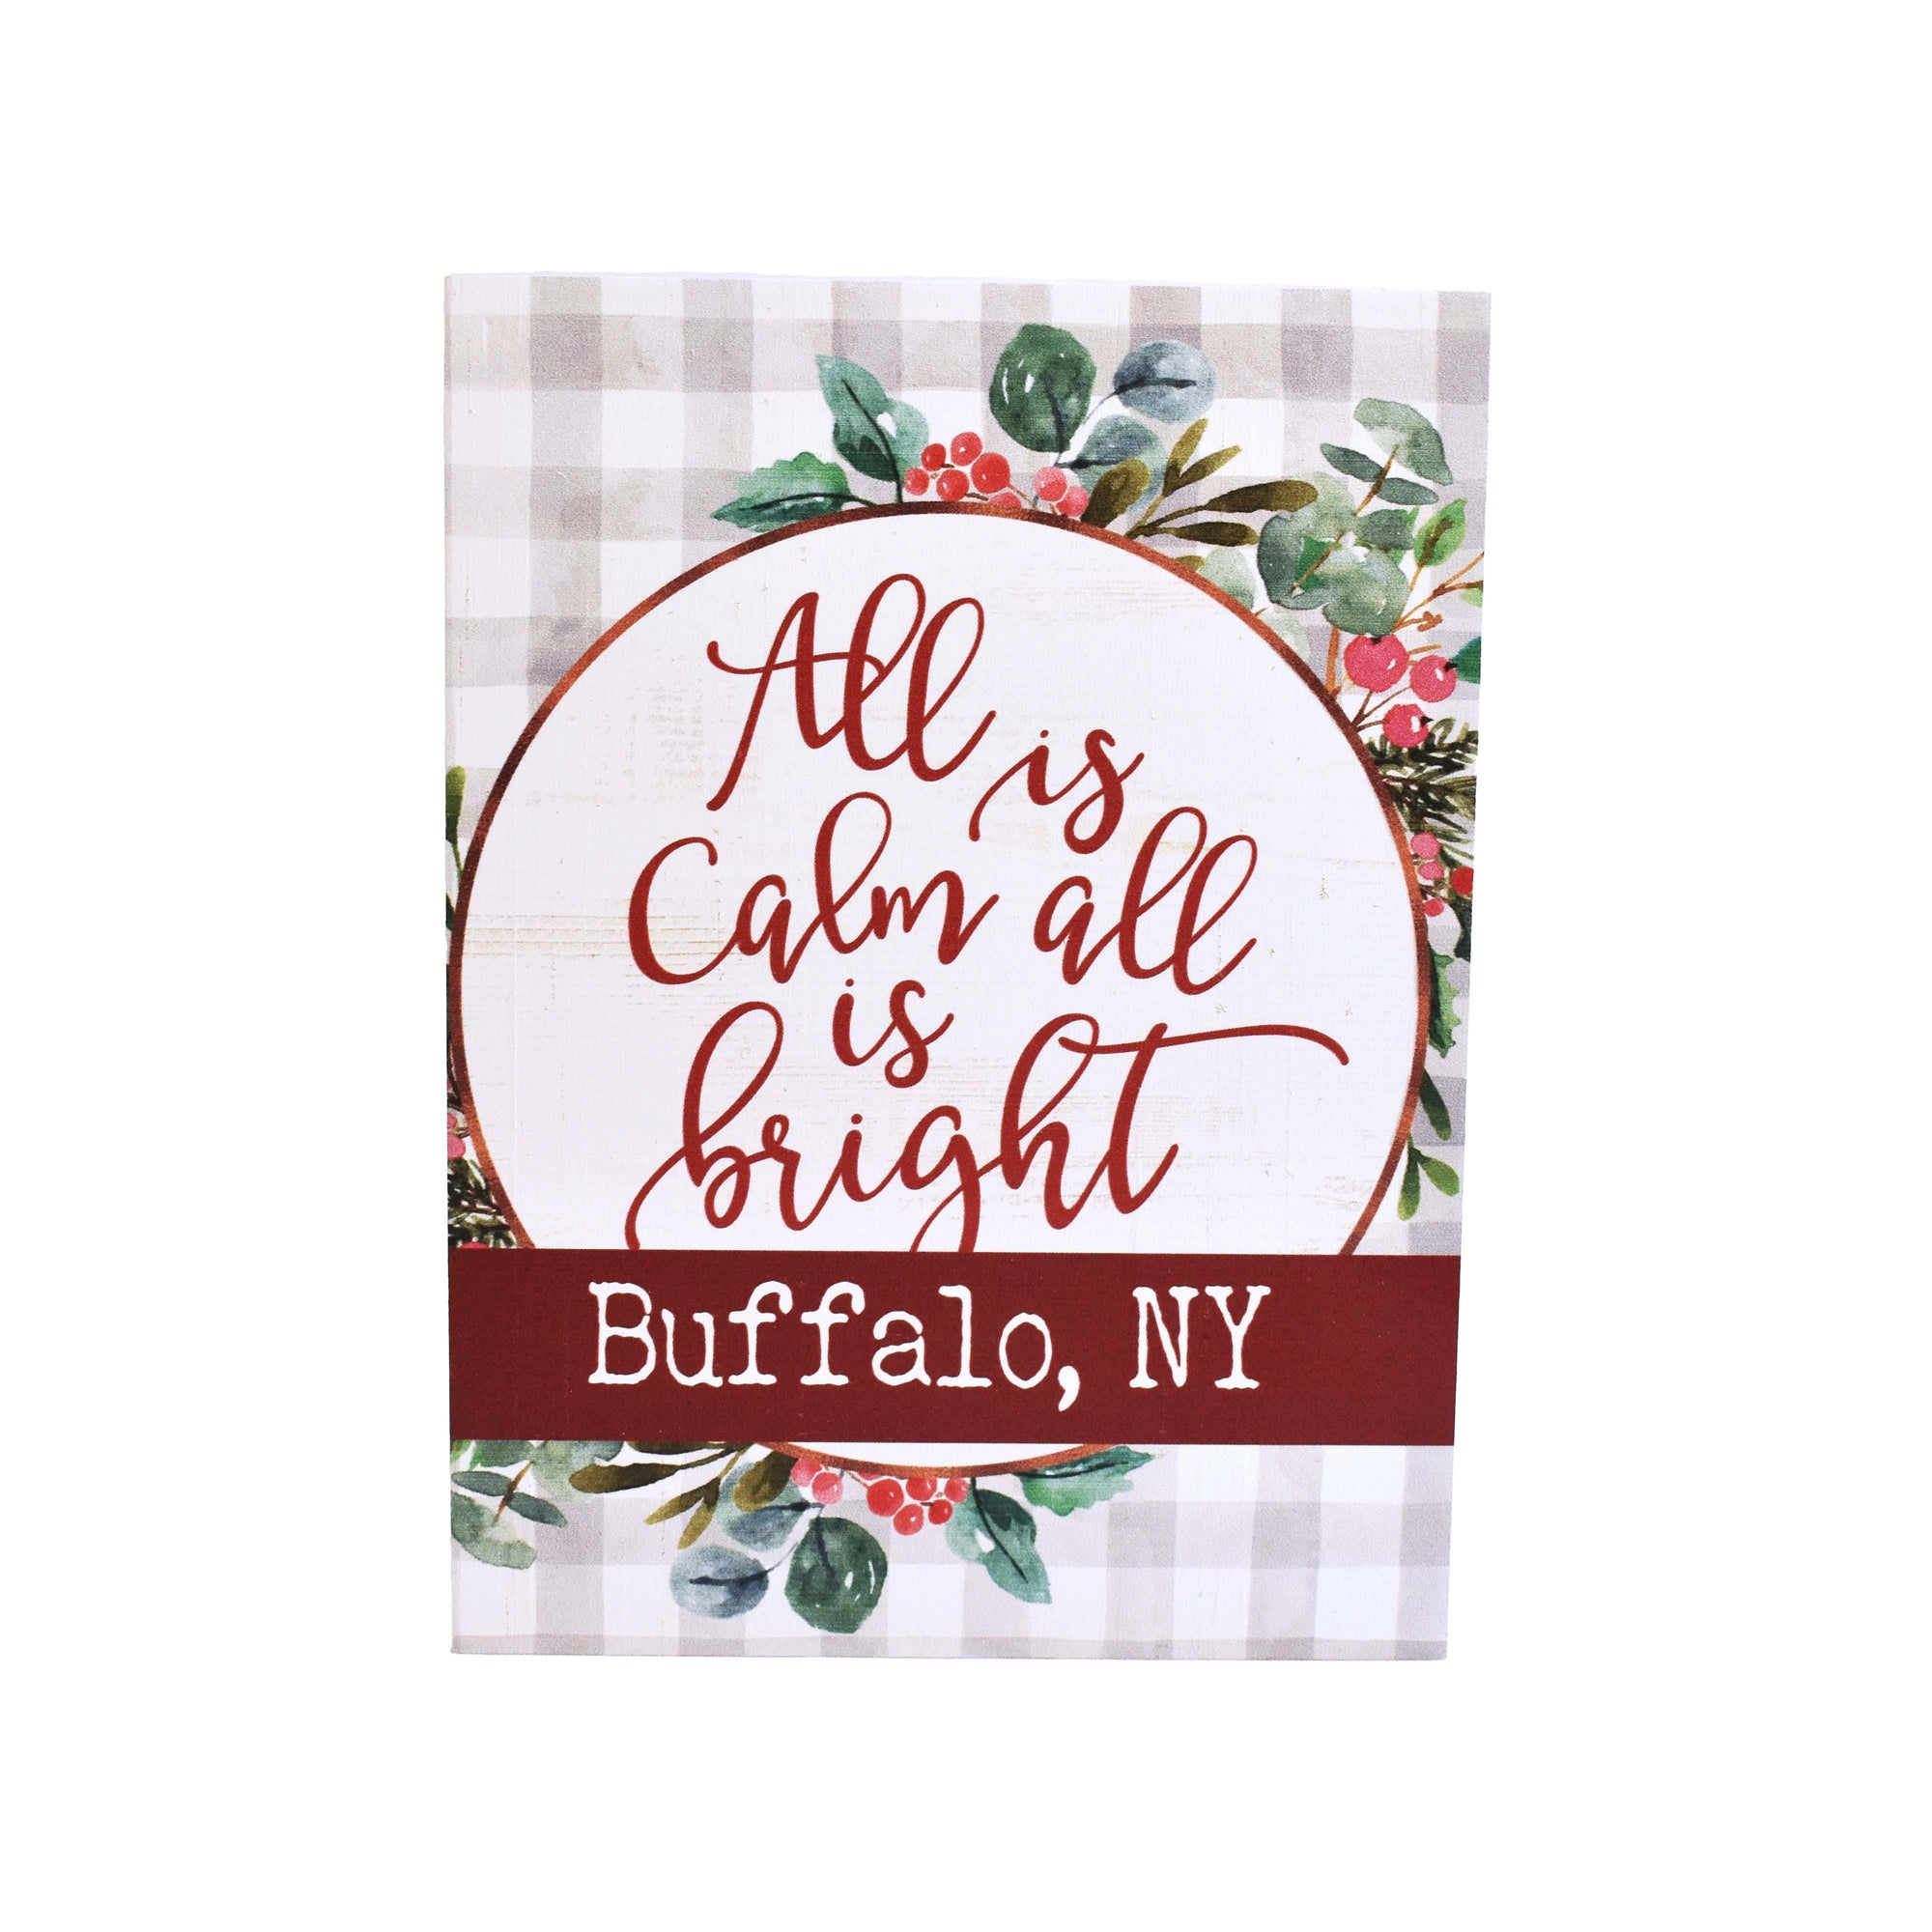 &quot;All is Calm, All is Bright. Buffalo, NY&quot; Wooden Sign - The BFLO Store